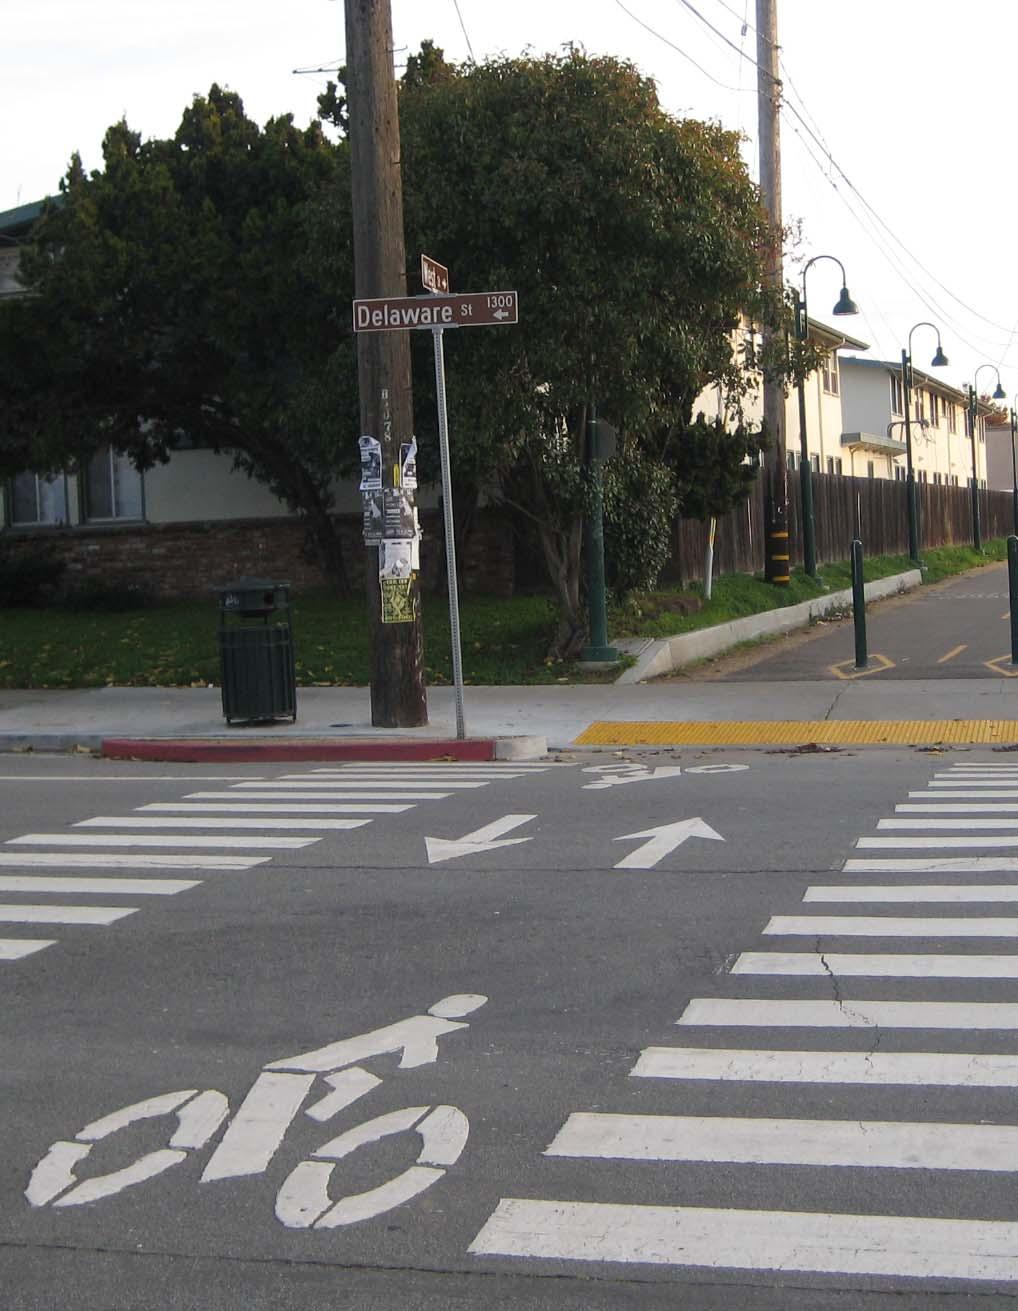 High Visibility Crosswalk/Crossbike Creates a visibly prominent crossing for